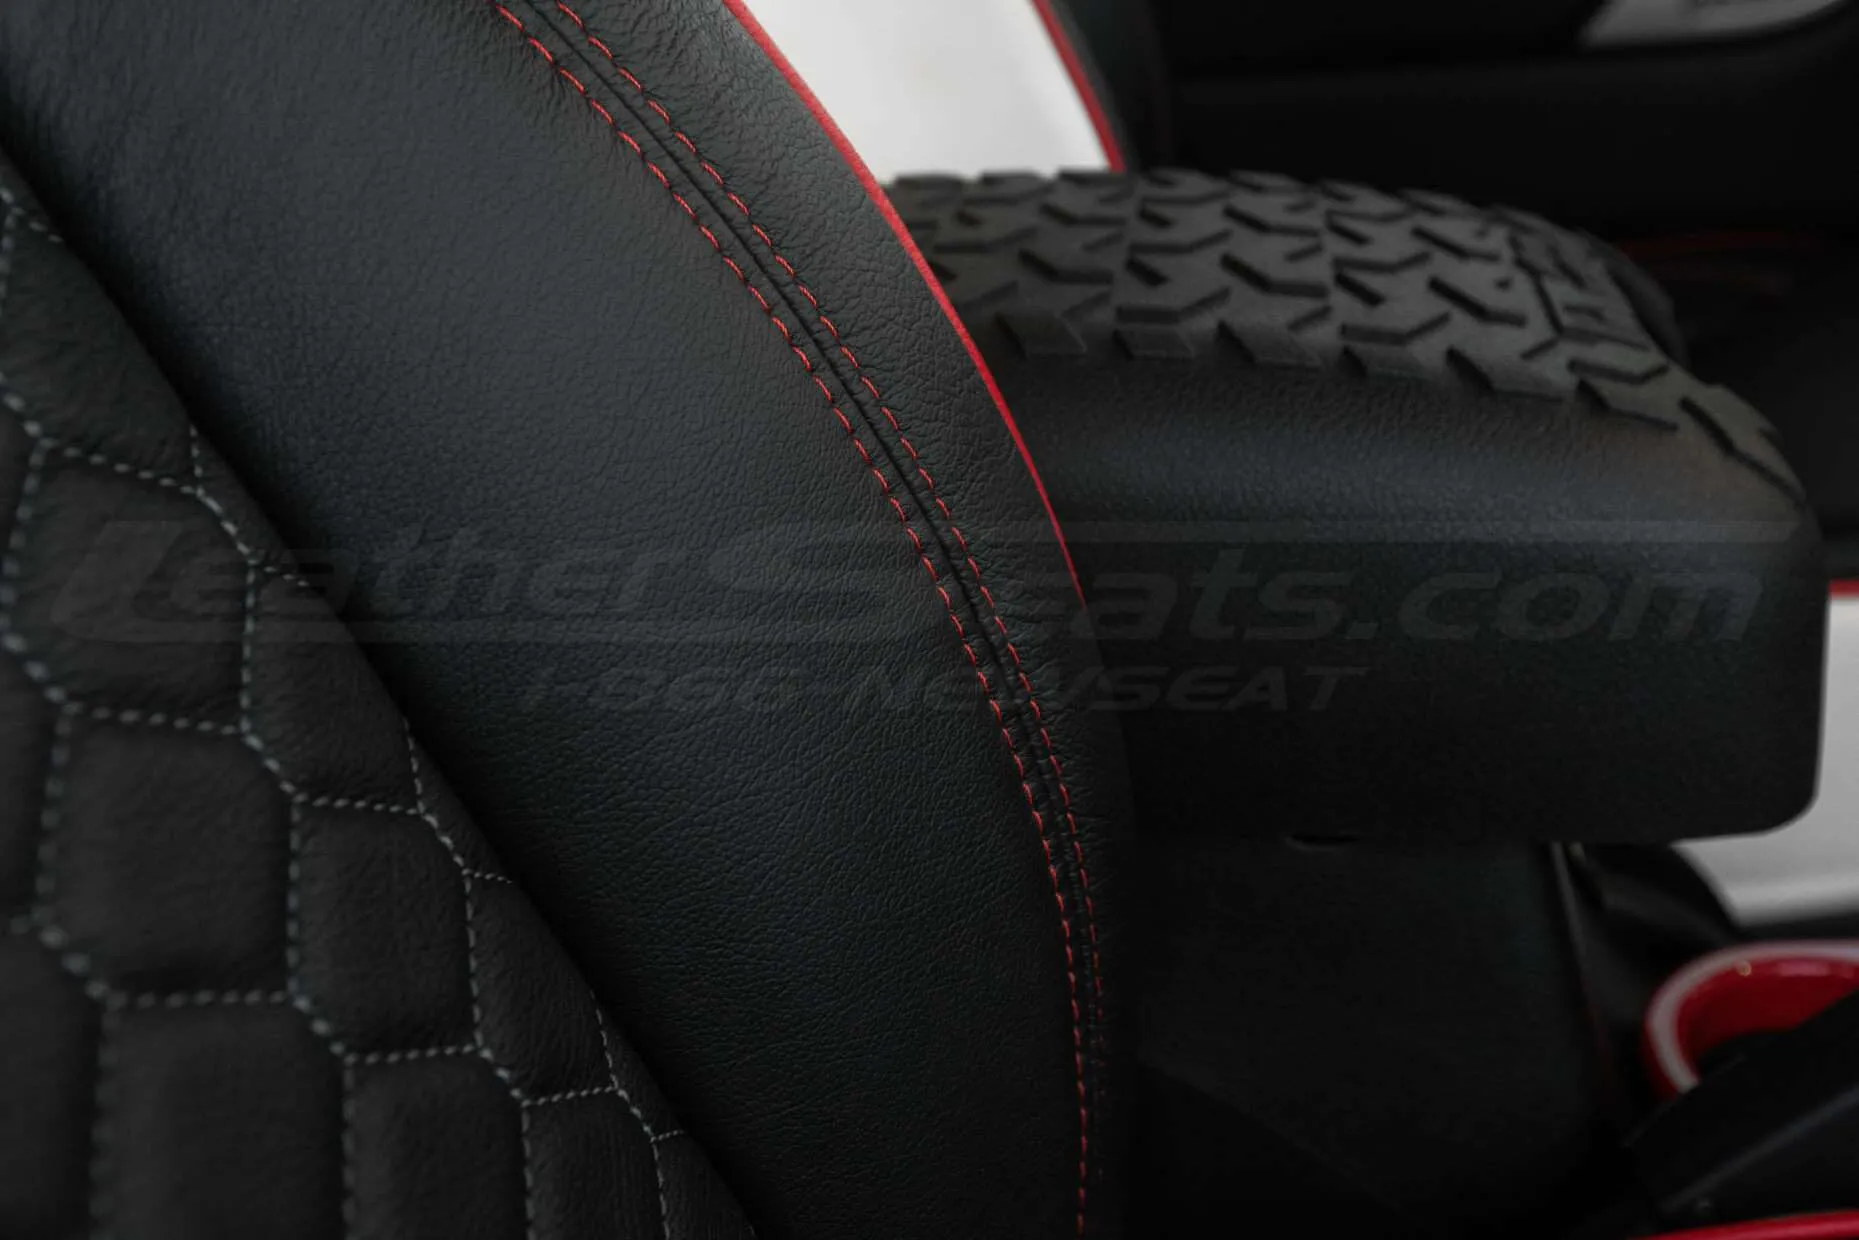 2013-2018 Jeep Wrangler Reticulated Hex installed Upholstery Kit - White/Black/Bright Red - Bolster double-stitching